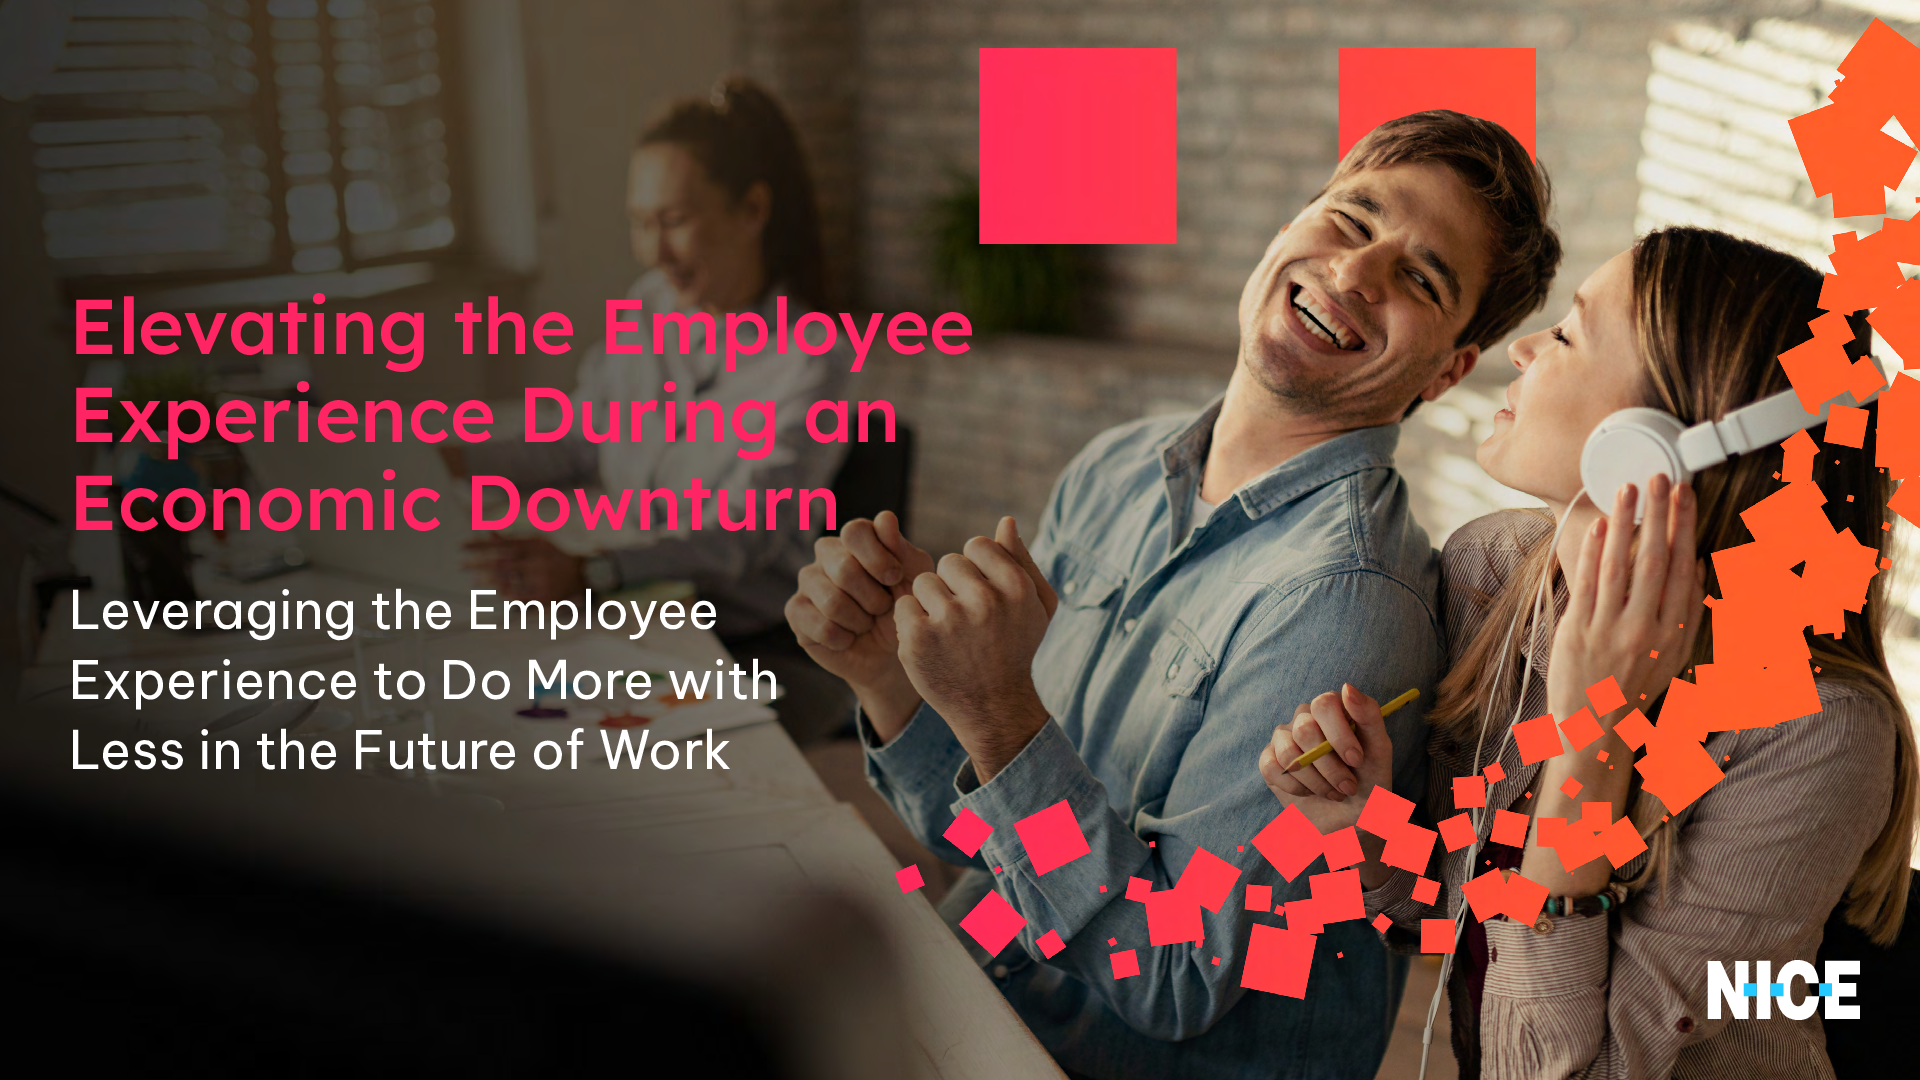 Elevating the Employee Experience During an Economic Downturn